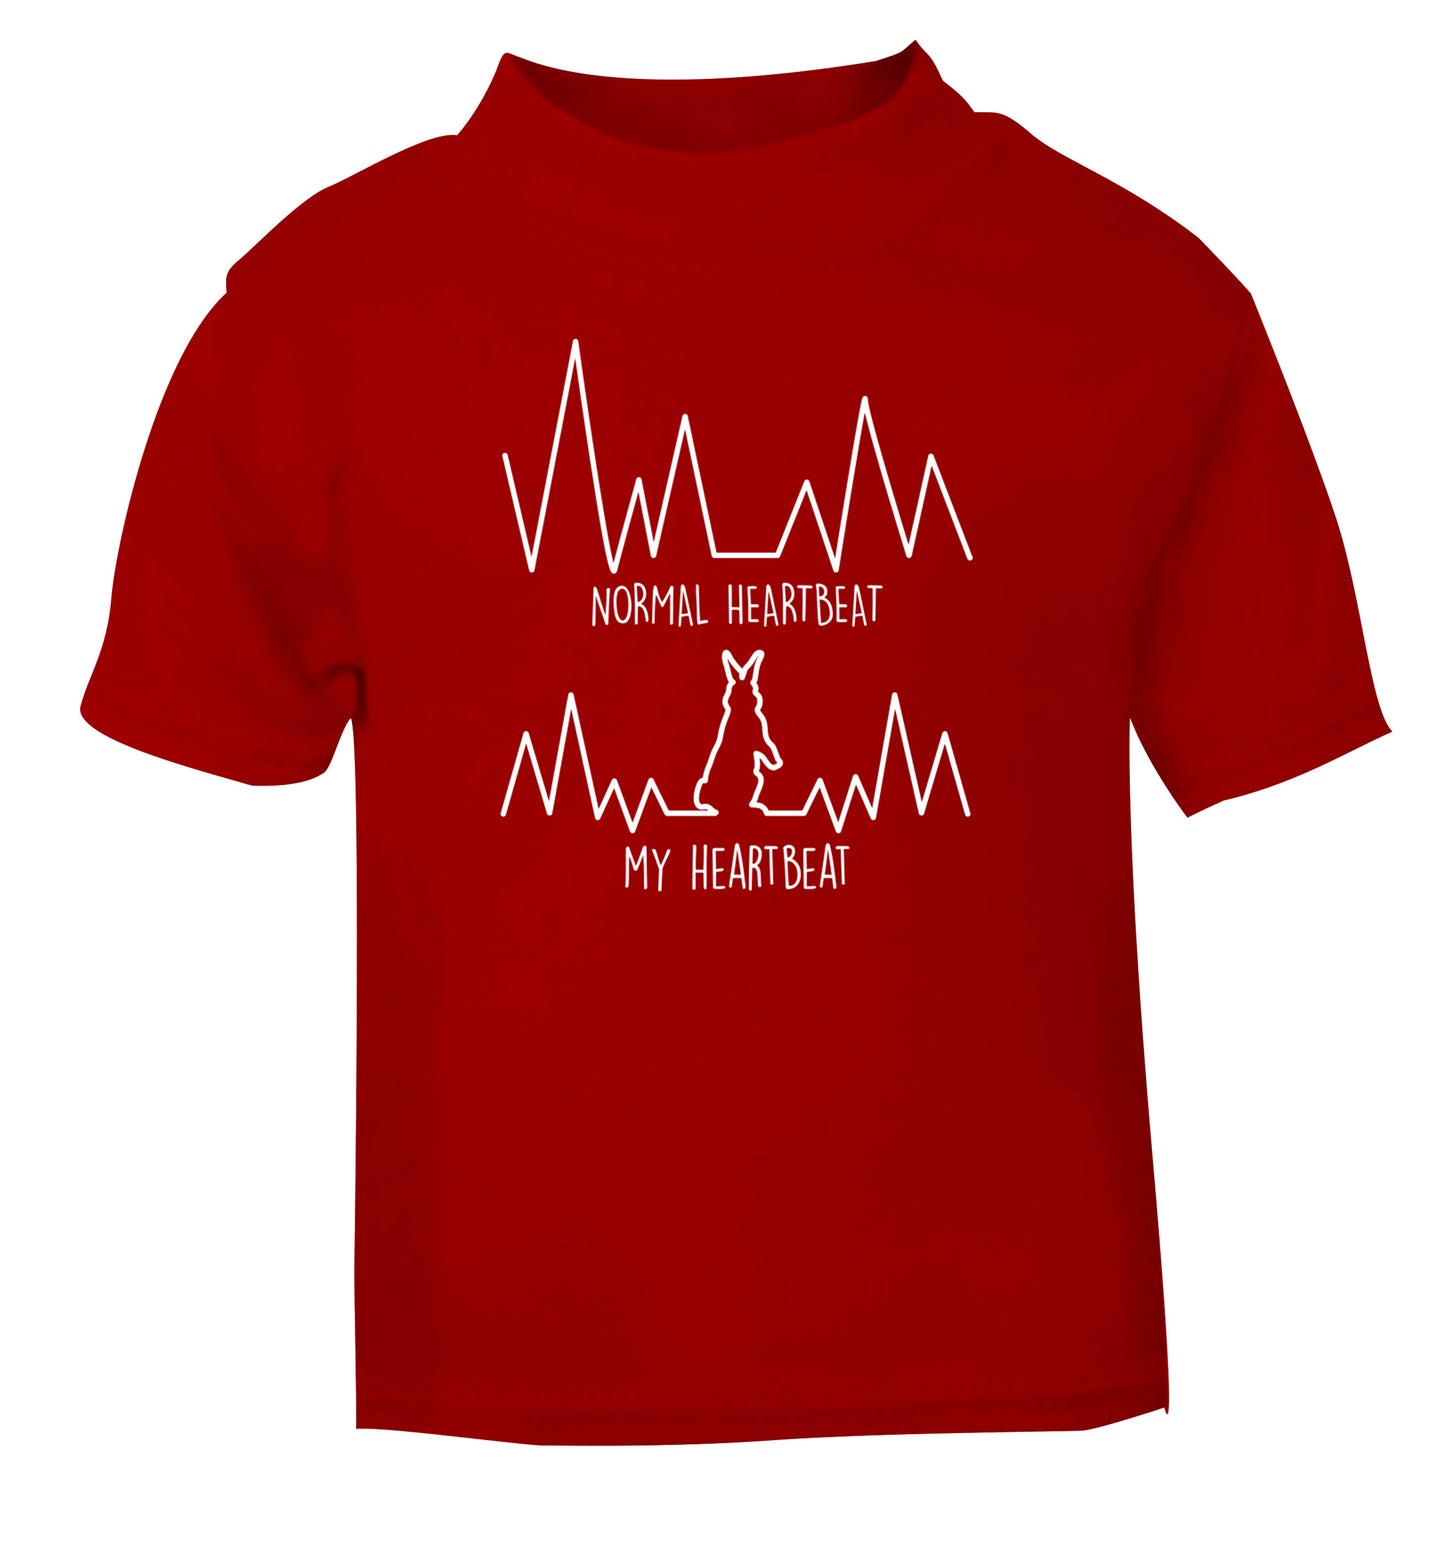 Normal heartbeat, my heartbeat rabbit lover red Baby Toddler Tshirt 2 Years